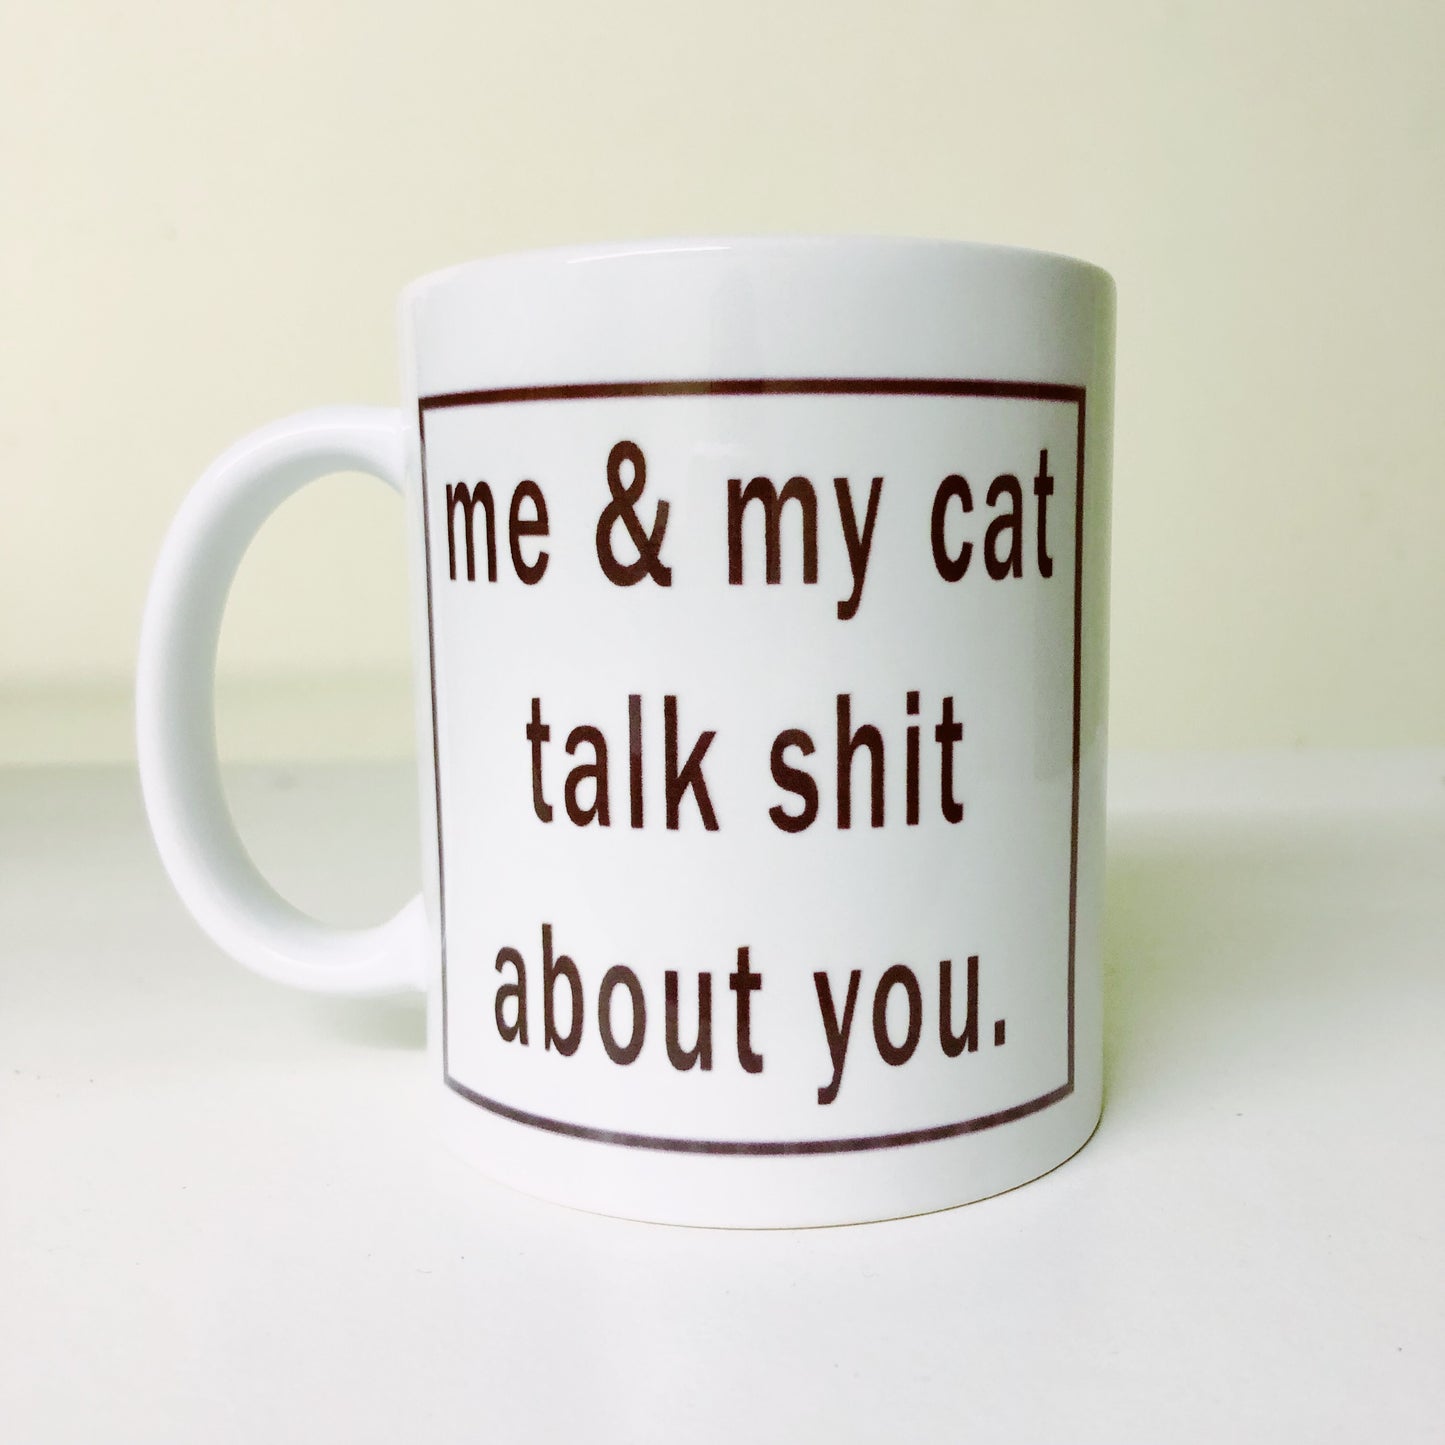 My cat/dog and I talk about you